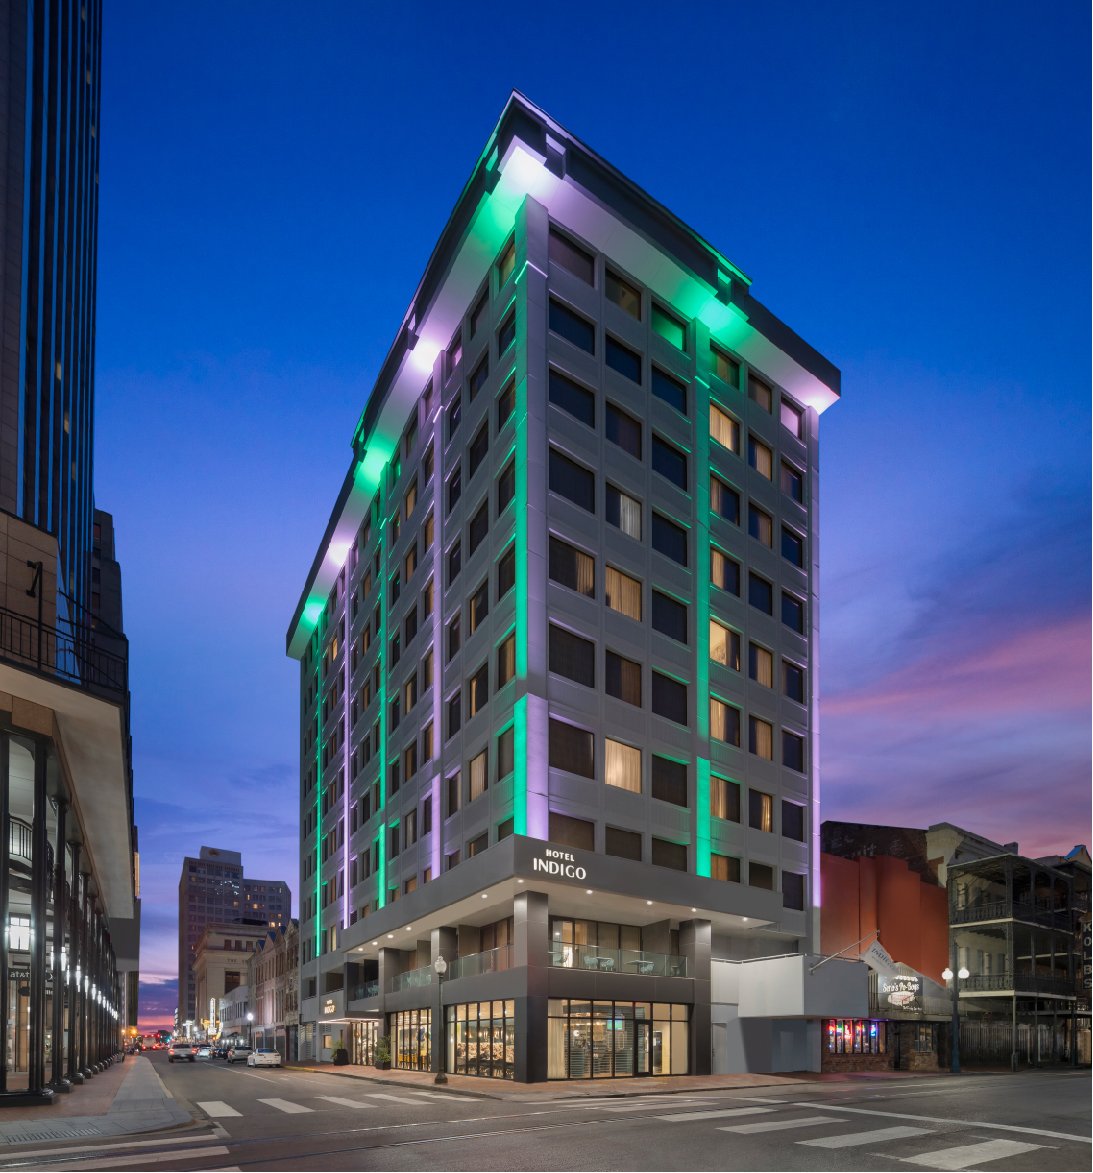 Exterior photo of the Hotel Indigo New Orleans at night